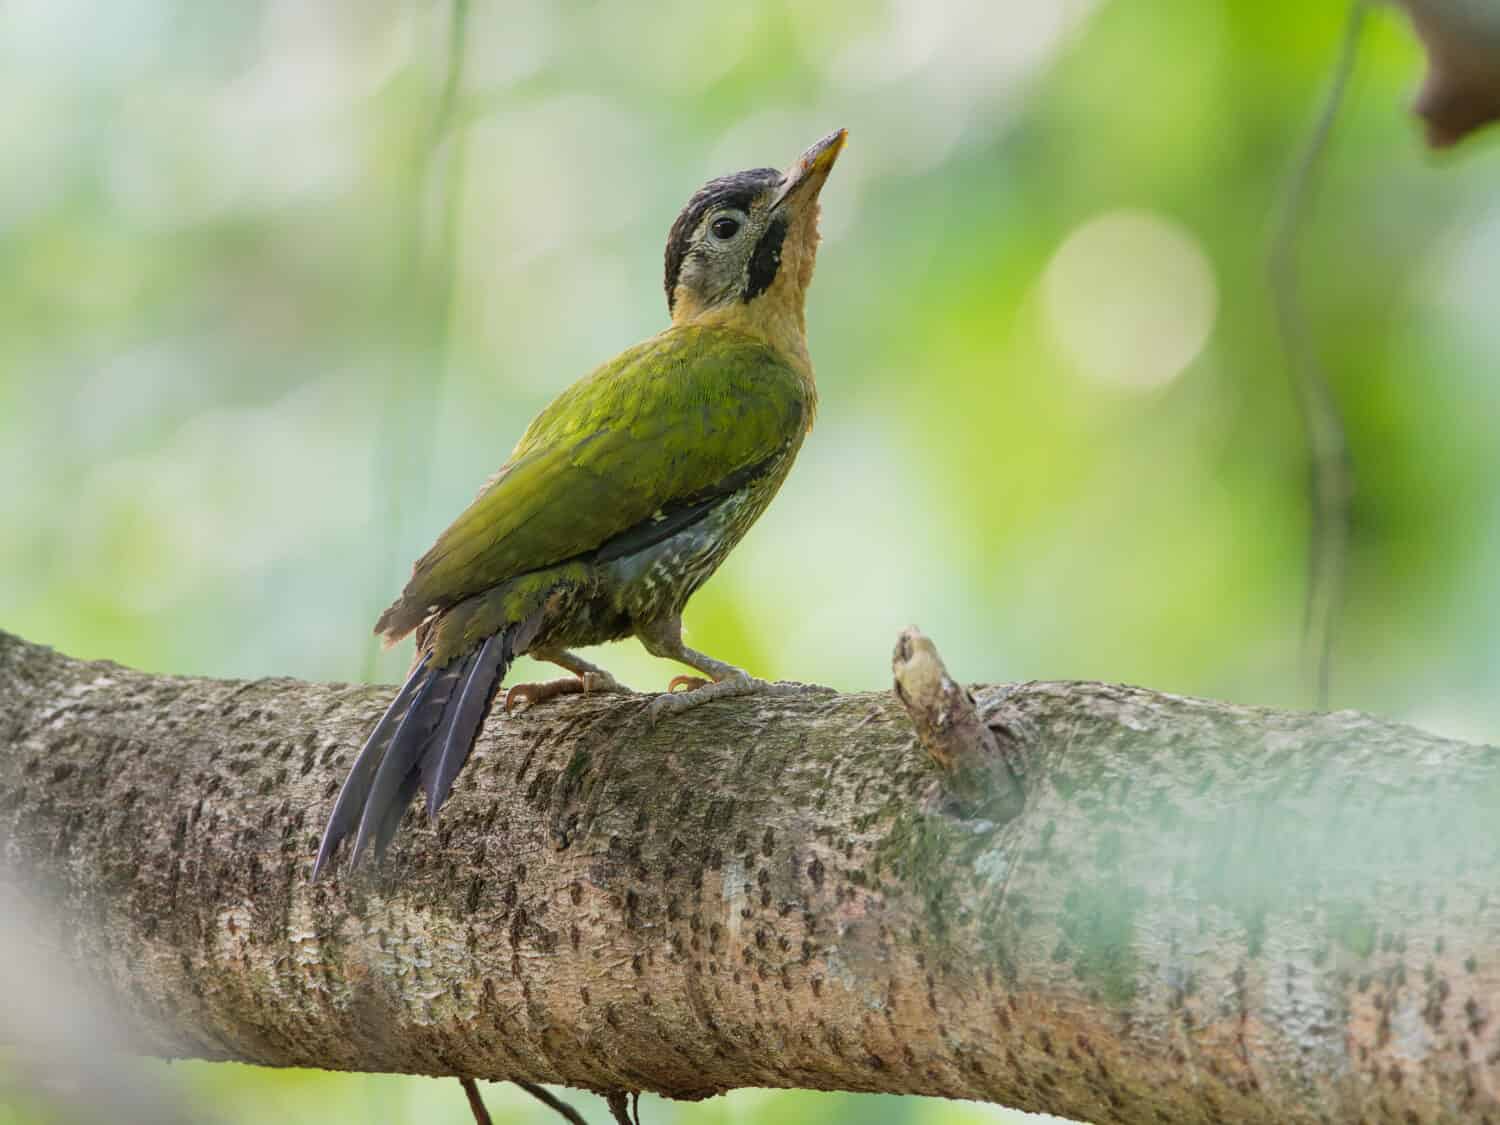 The laced woodpecker (Picus vittatus) is a species of bird in the family Picidae. It is found throughout Southeast Asia, Cambodia, China, Indonesia, Laos, Malaysia, Myanmar, Singapore.